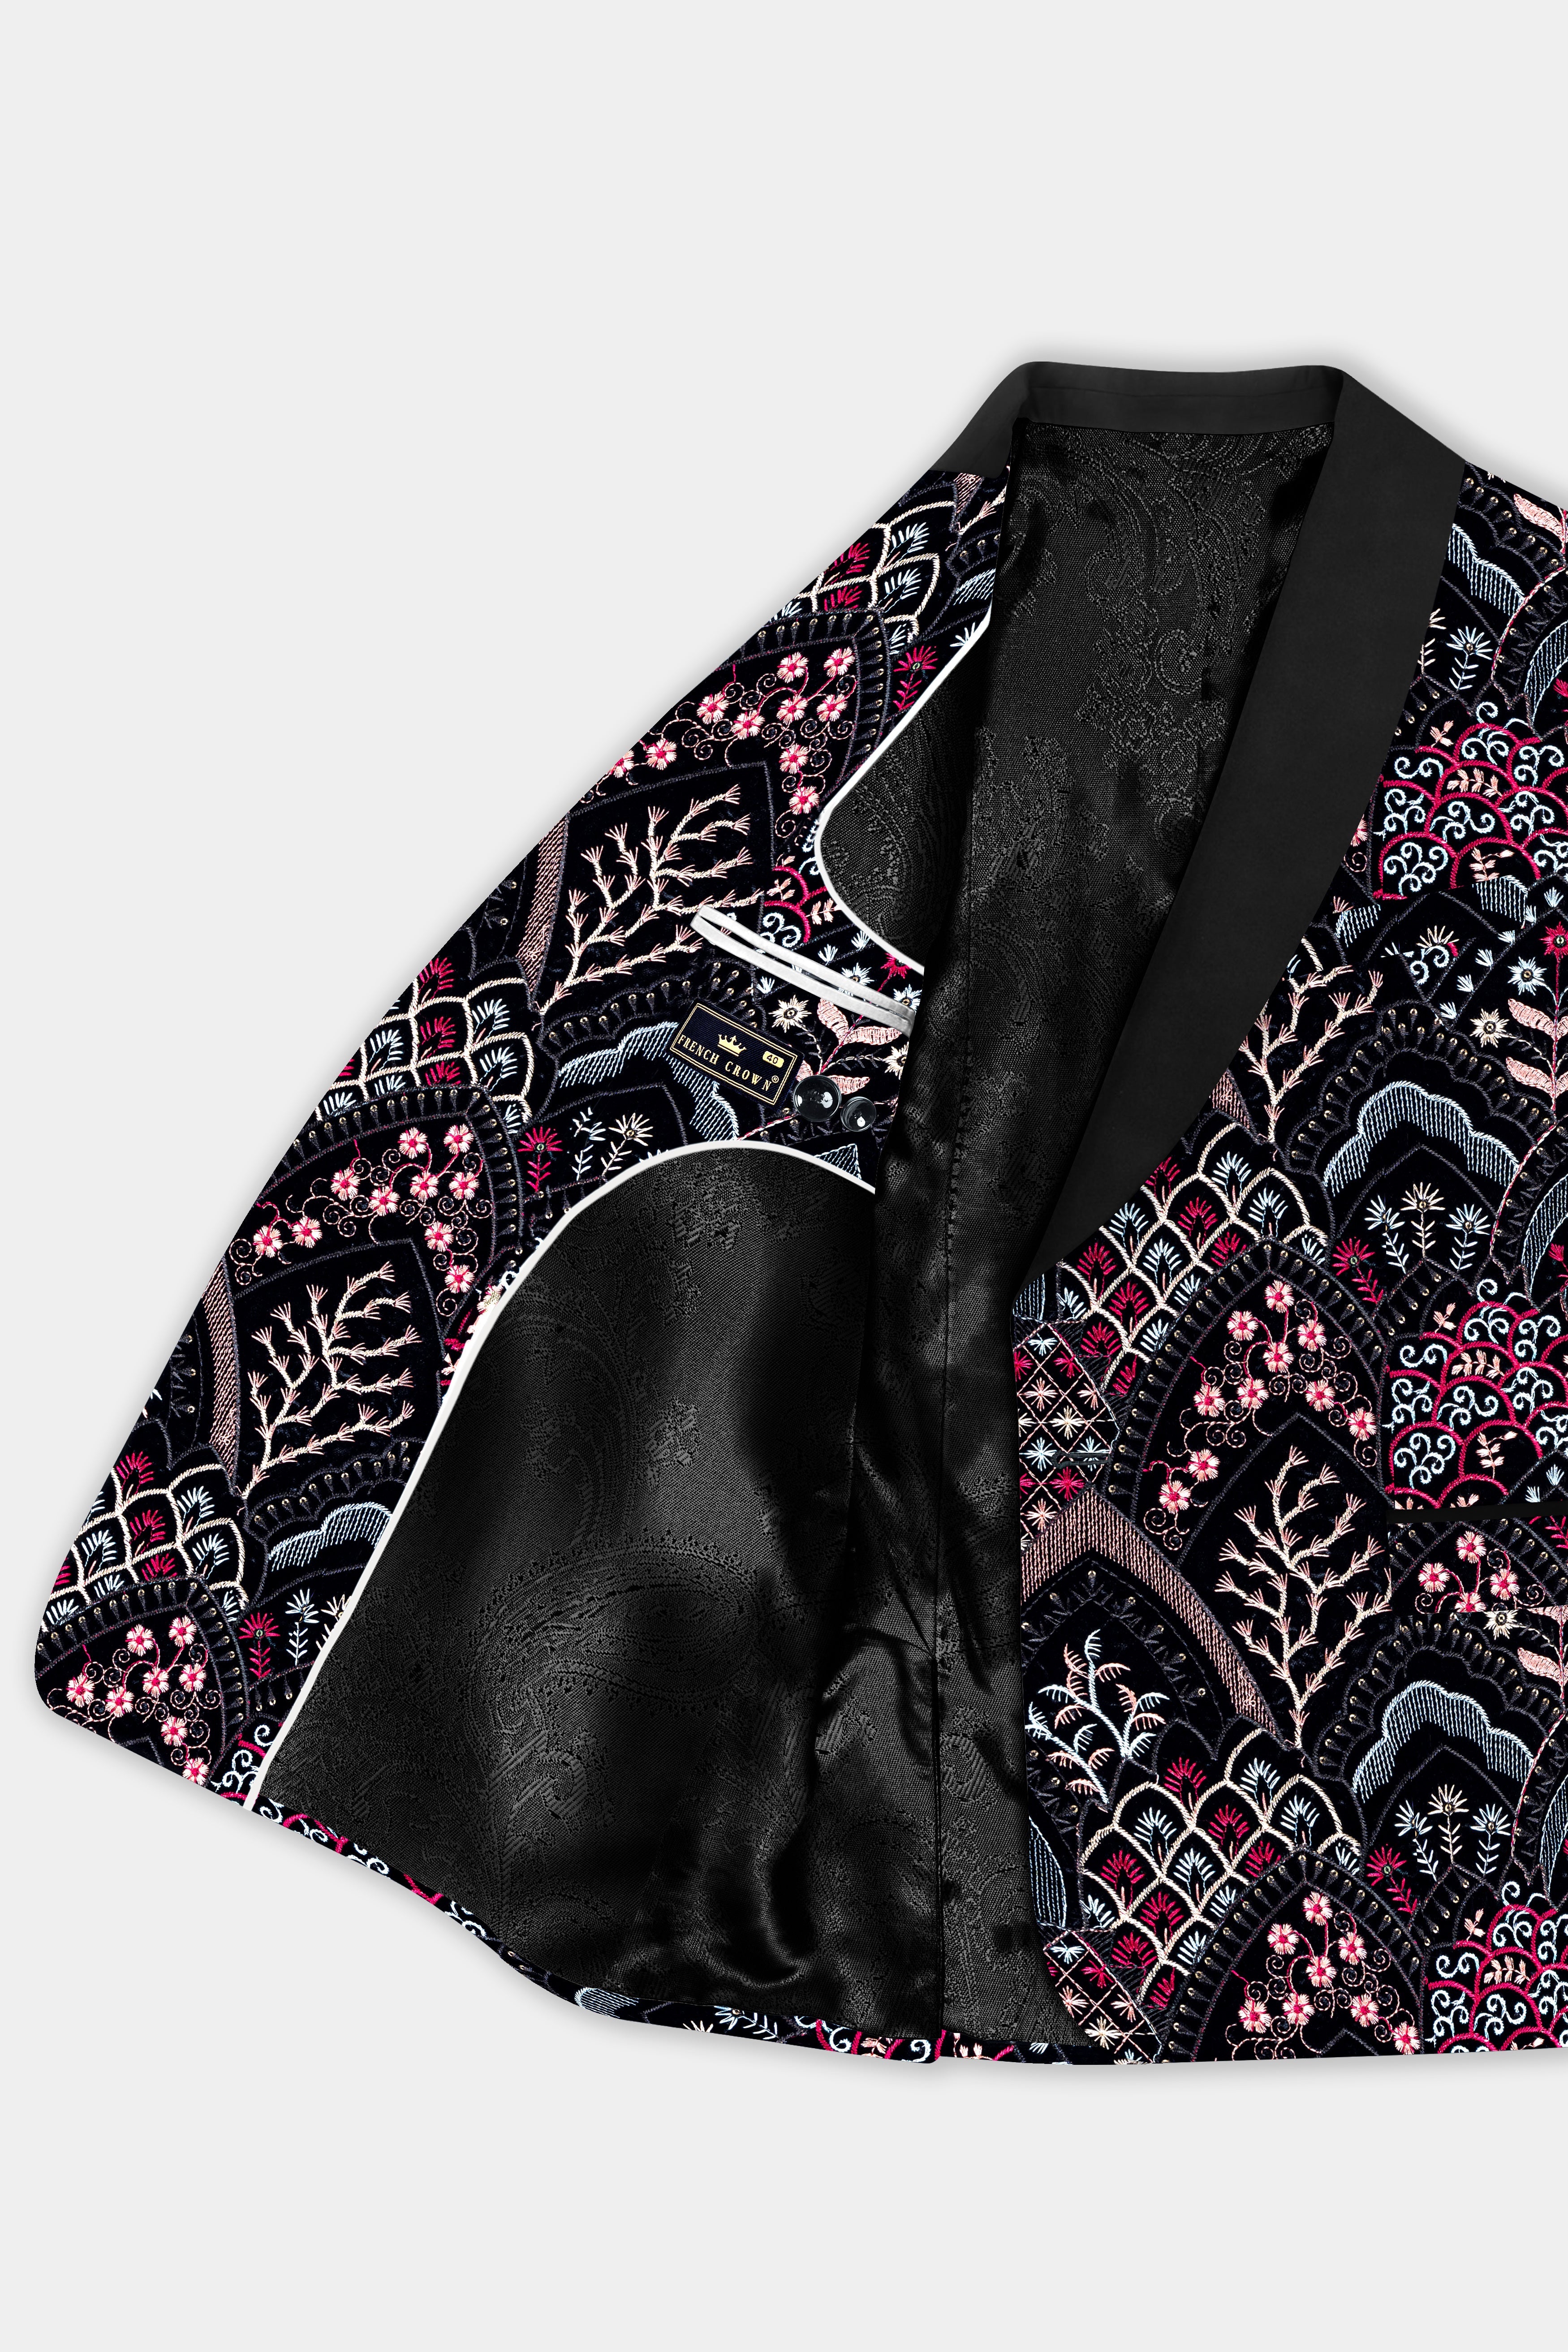 Jade Black with Tyrian Pink and Opium Brown Multicolour Floral Embroidered Tuxedo Blazer BL3690-BKL-36, BL3690-BKL-38, BL3690-BKL-40, BL3690-BKL-42, BL3690-BKL-44, BL3690-BKL-46, BL3690-BKL-48, BL3690-BKL-50, BL3690-BKL-52, BL3690-BKL-54, BL3690-BKL-56, BL3690-BKL-58, BL3690-BKL-60